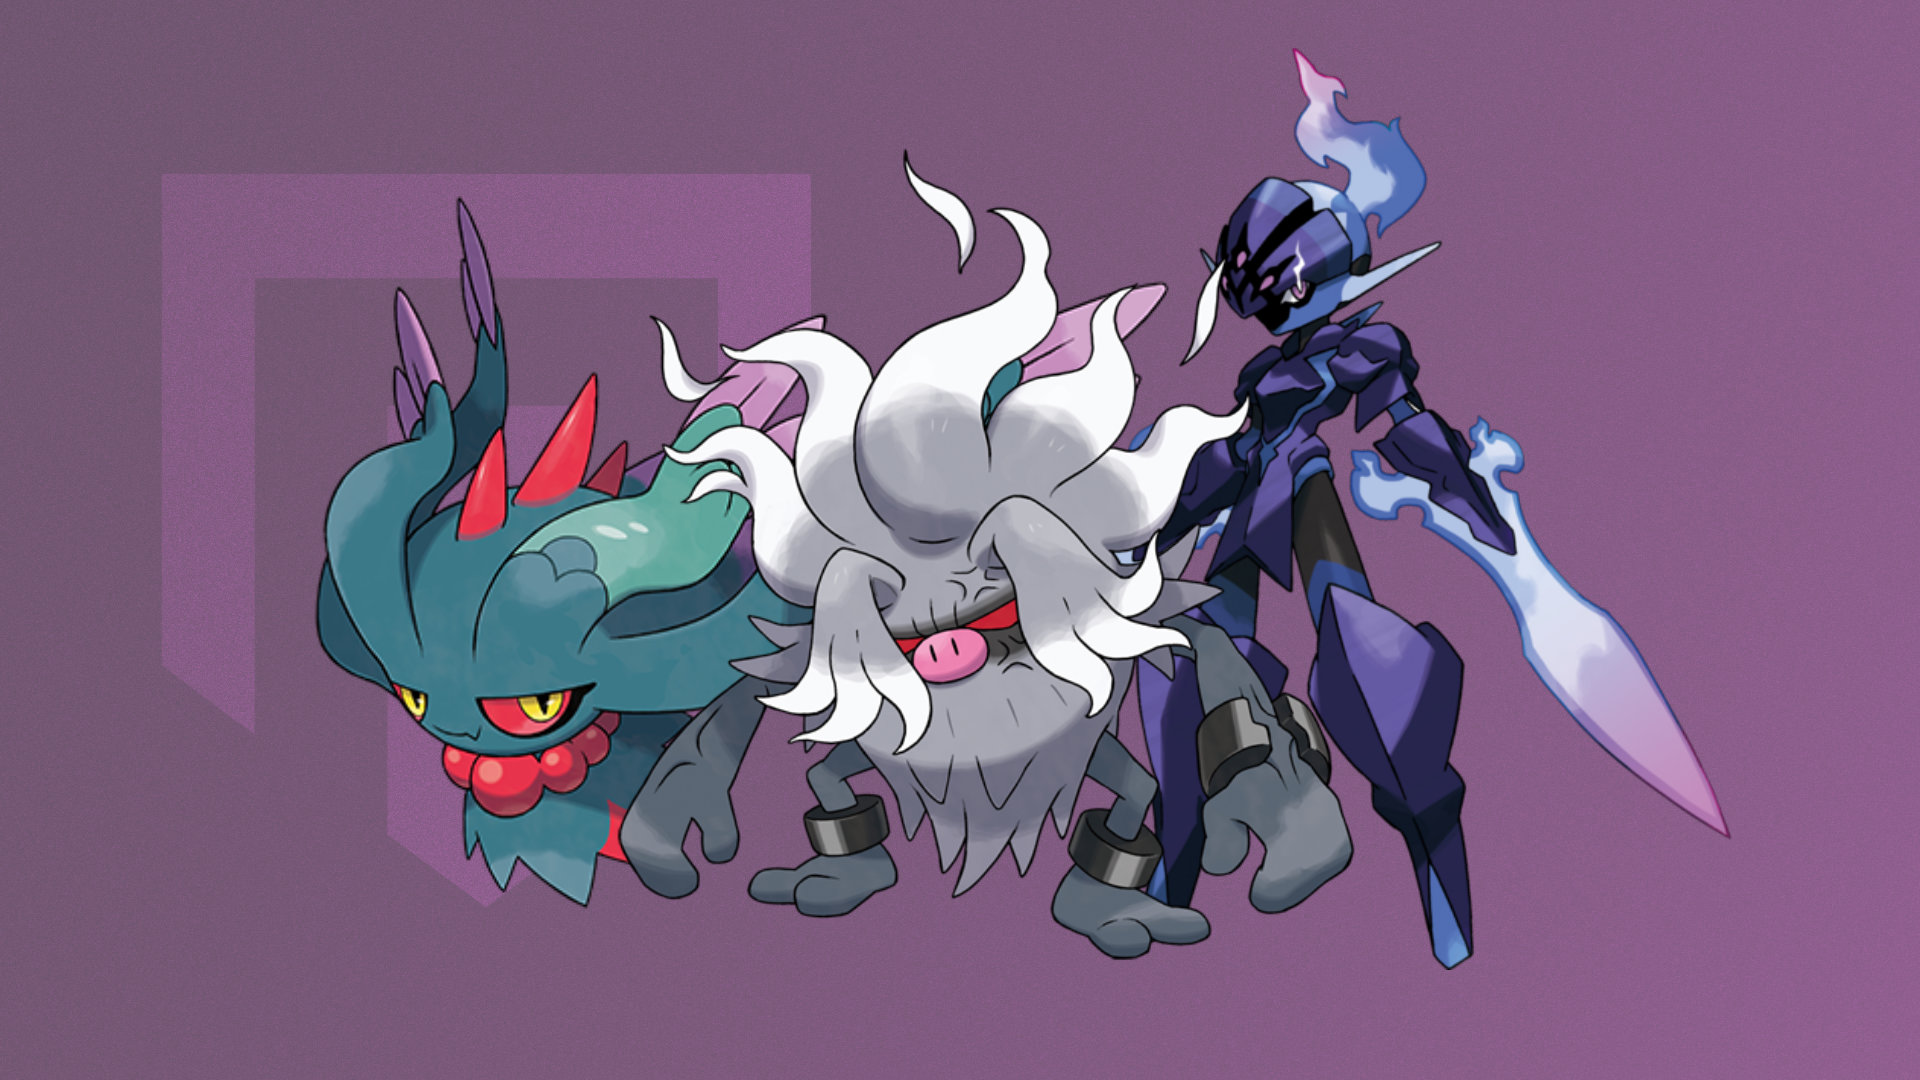 THIS IS SMOGON'S FAVORITE TEAM  POKEMON SCARLET AND VIOLET 